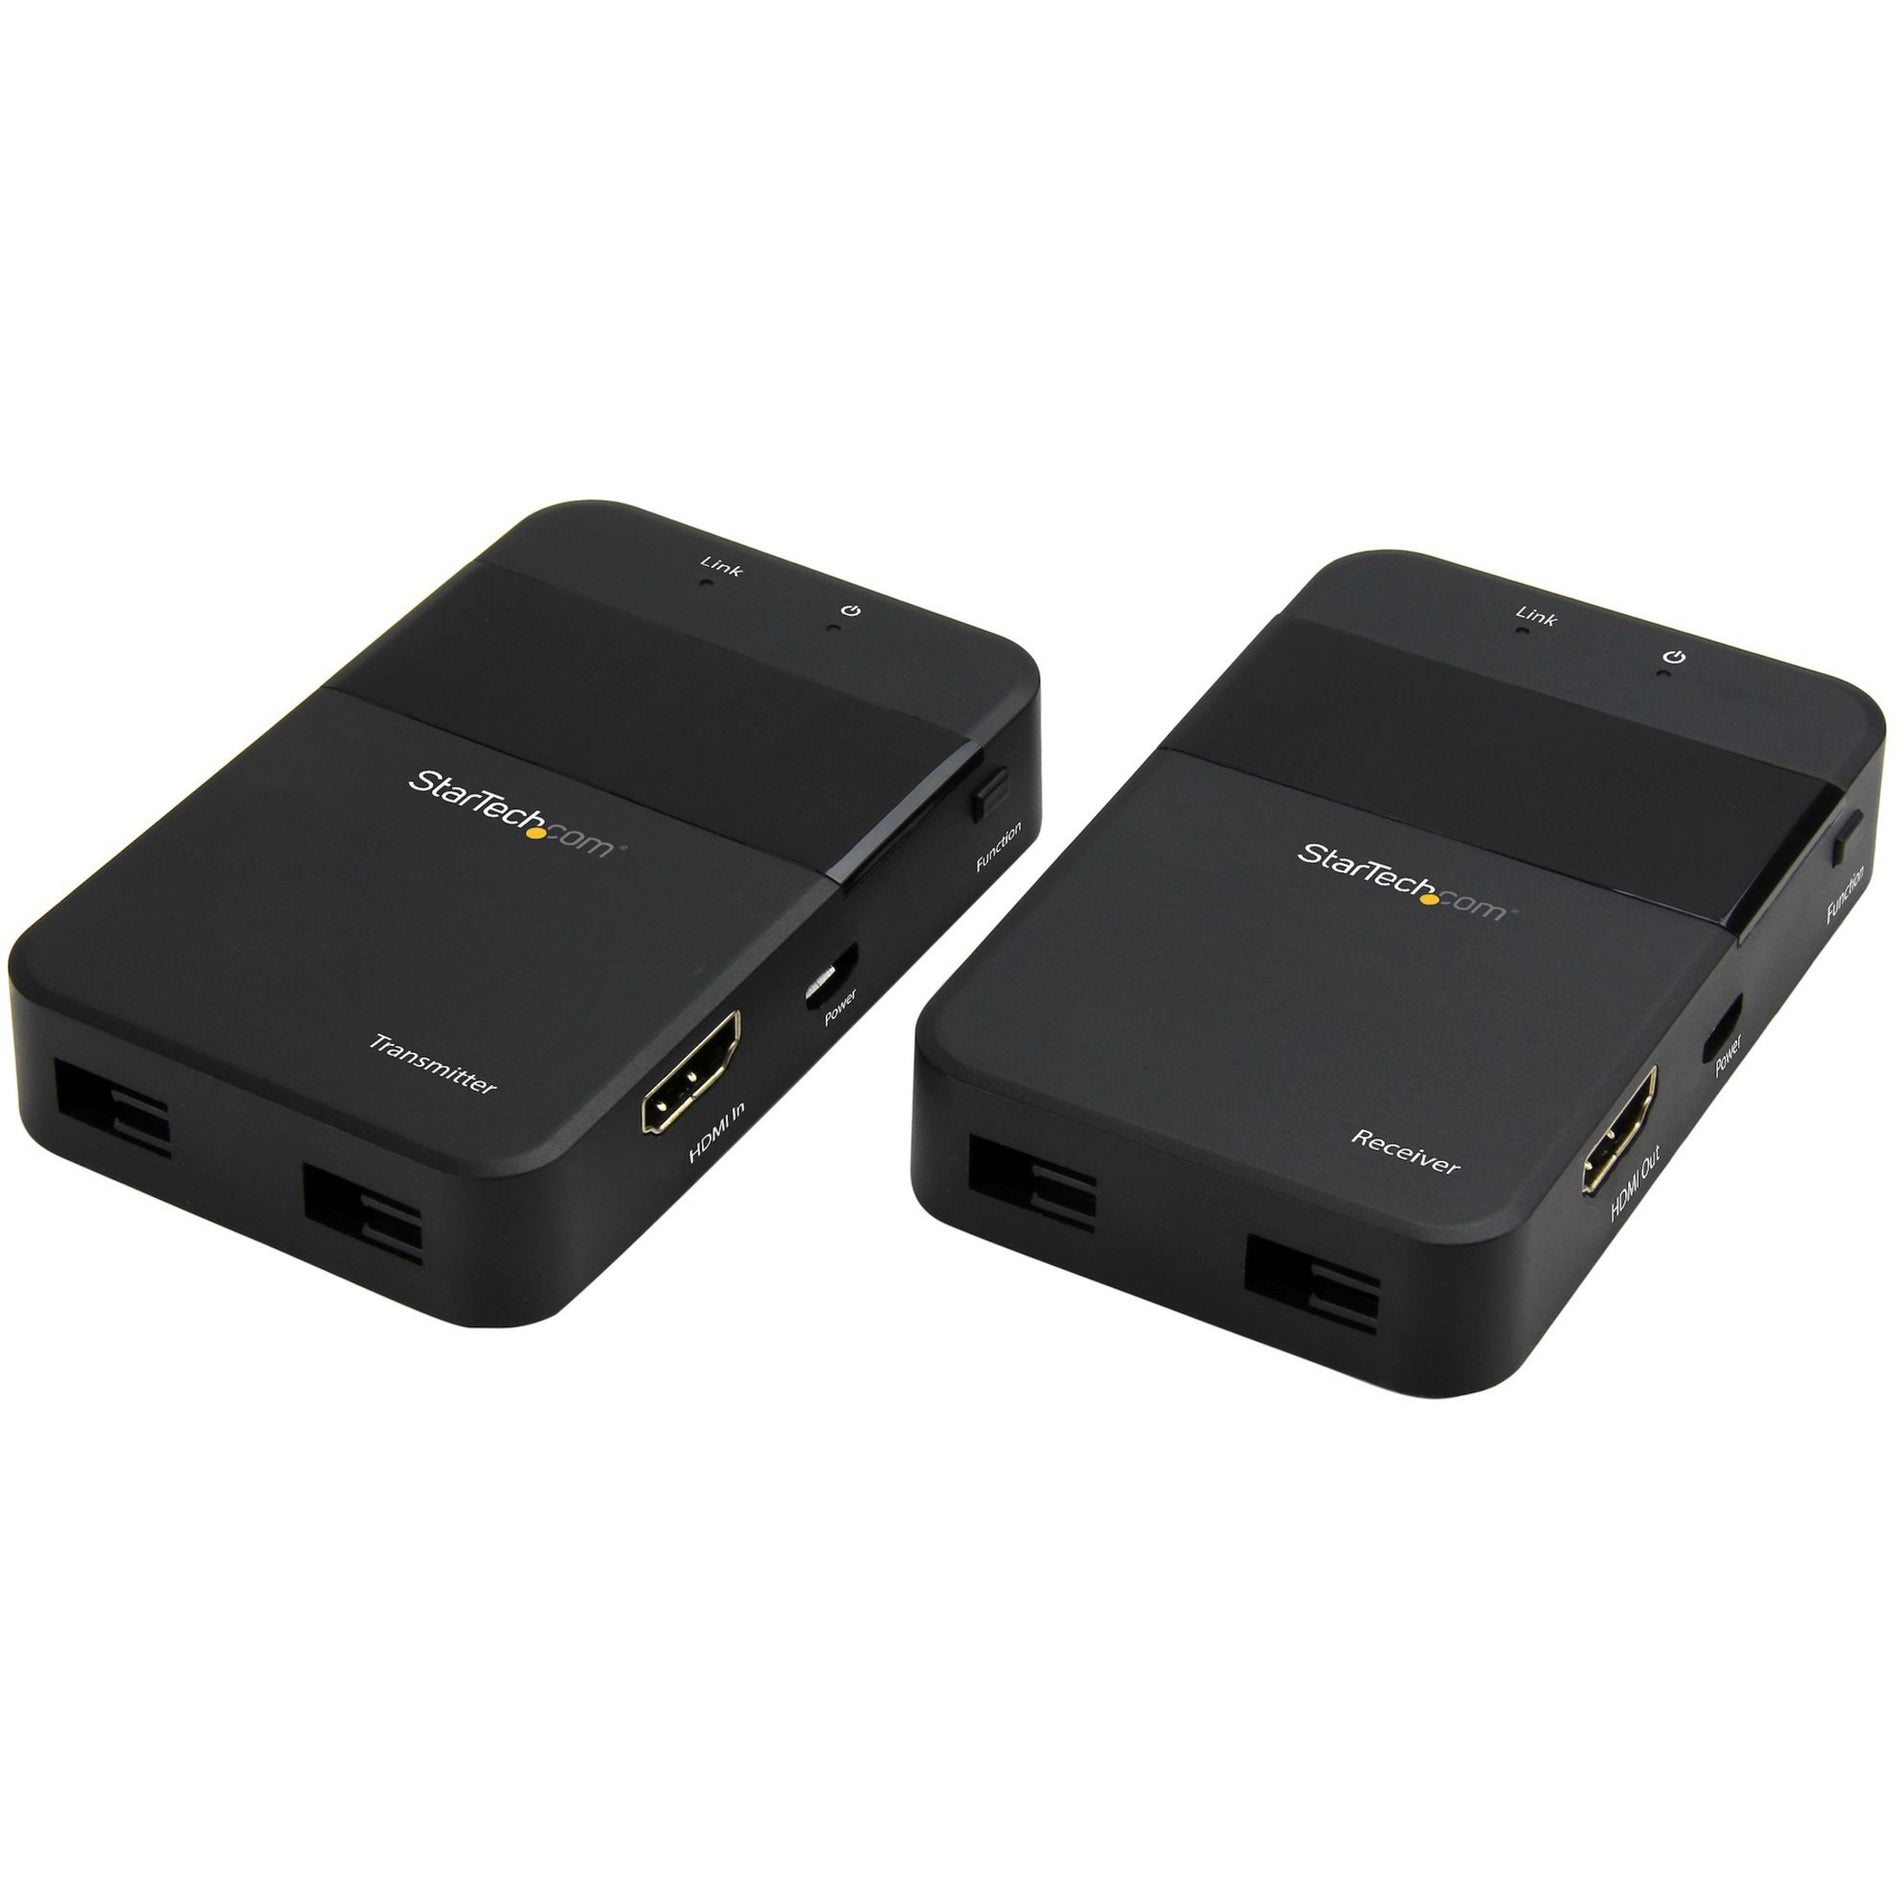 StarTech.com ST121WHDS HDMI over Wireless Extender - 65 ft. (20 m) - 1080p, Full HD Video Transmission